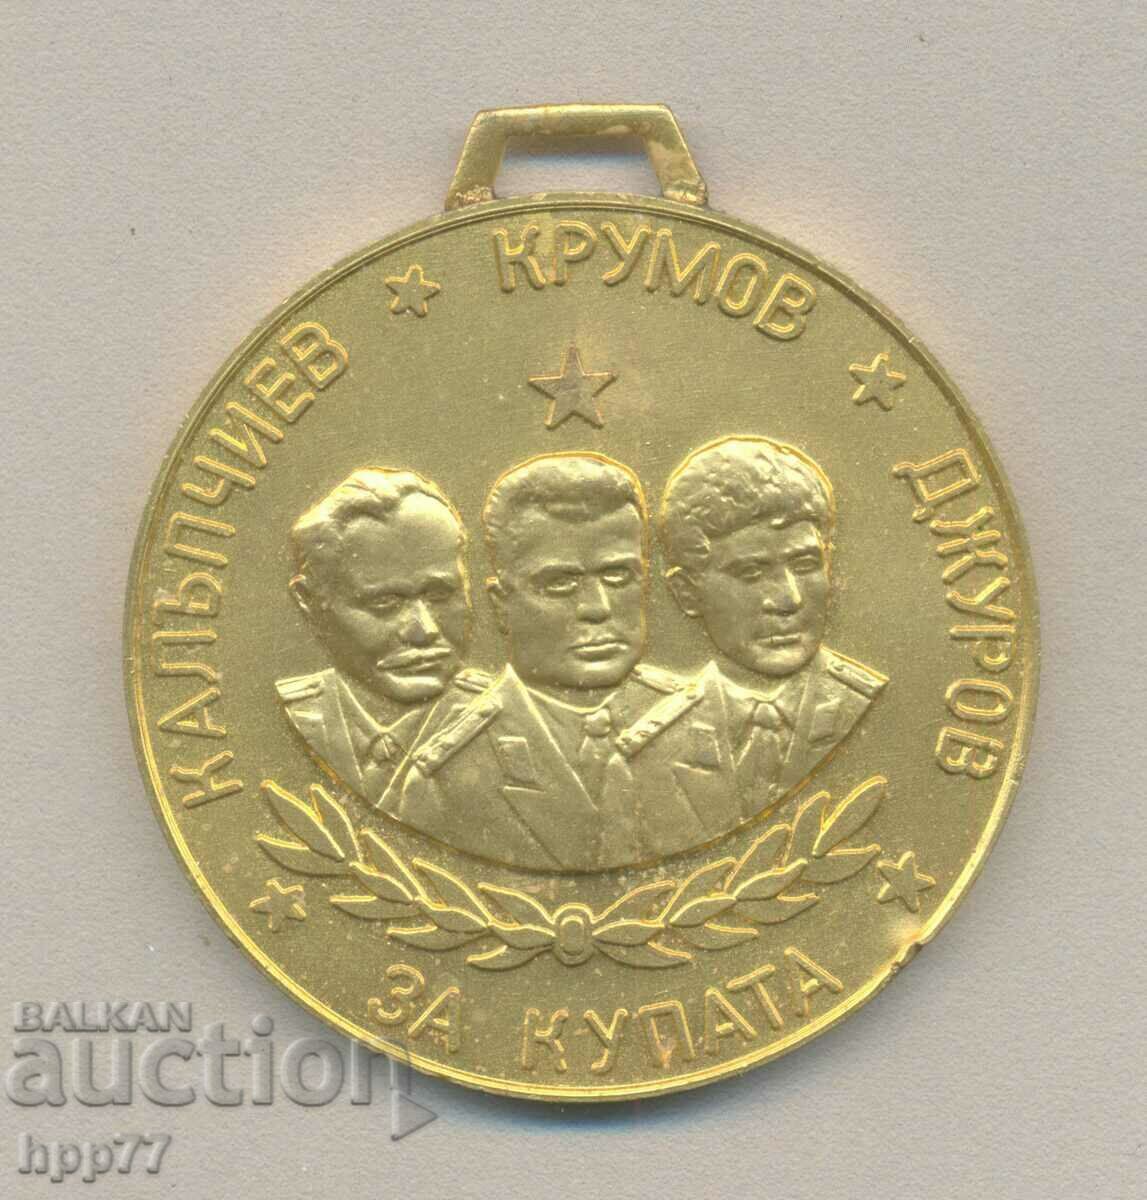 Rare award medal from the International Parachuting Competition